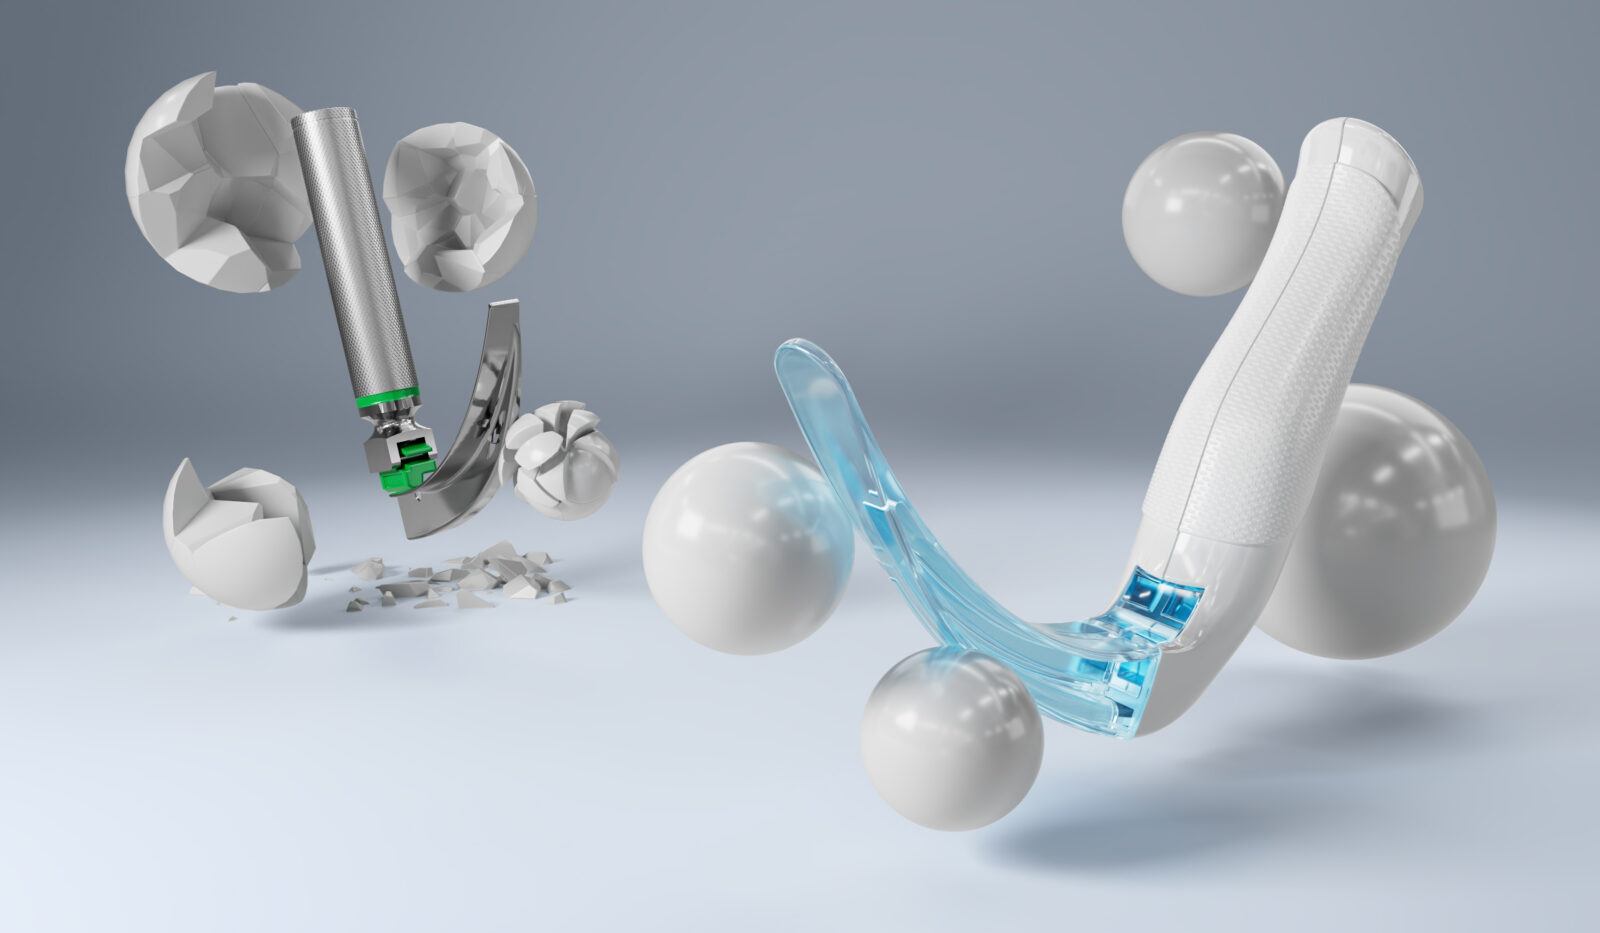 A render of Laryngoscopes, with the old design on the left and the new design on the right